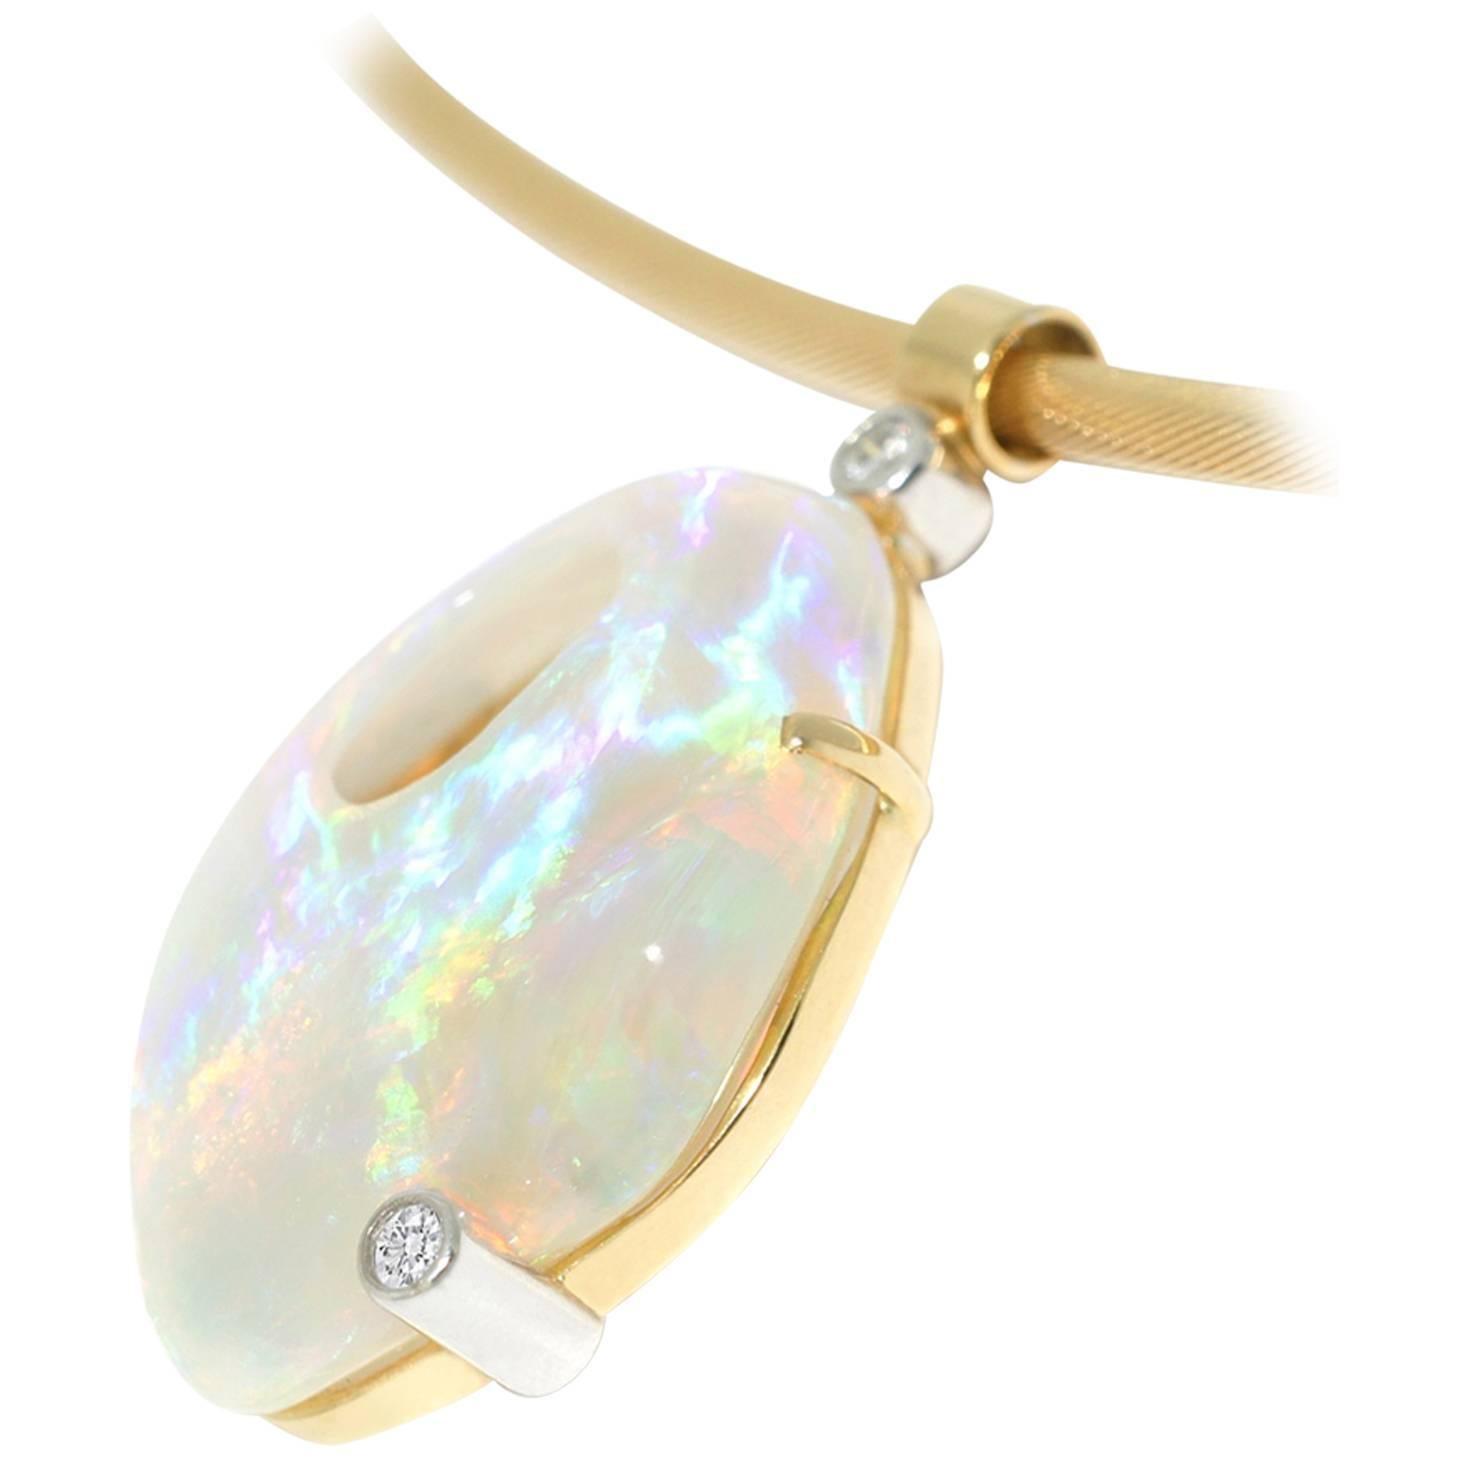 This gorgeous, one-of-a-kind Australian crystal opal necklace is handmade in 18k yellow gold and adorned with two brilliant cut white diamonds. The opal has a lovely, strong play of colour with blues, greens, oranges, yellows and purples. Suspended